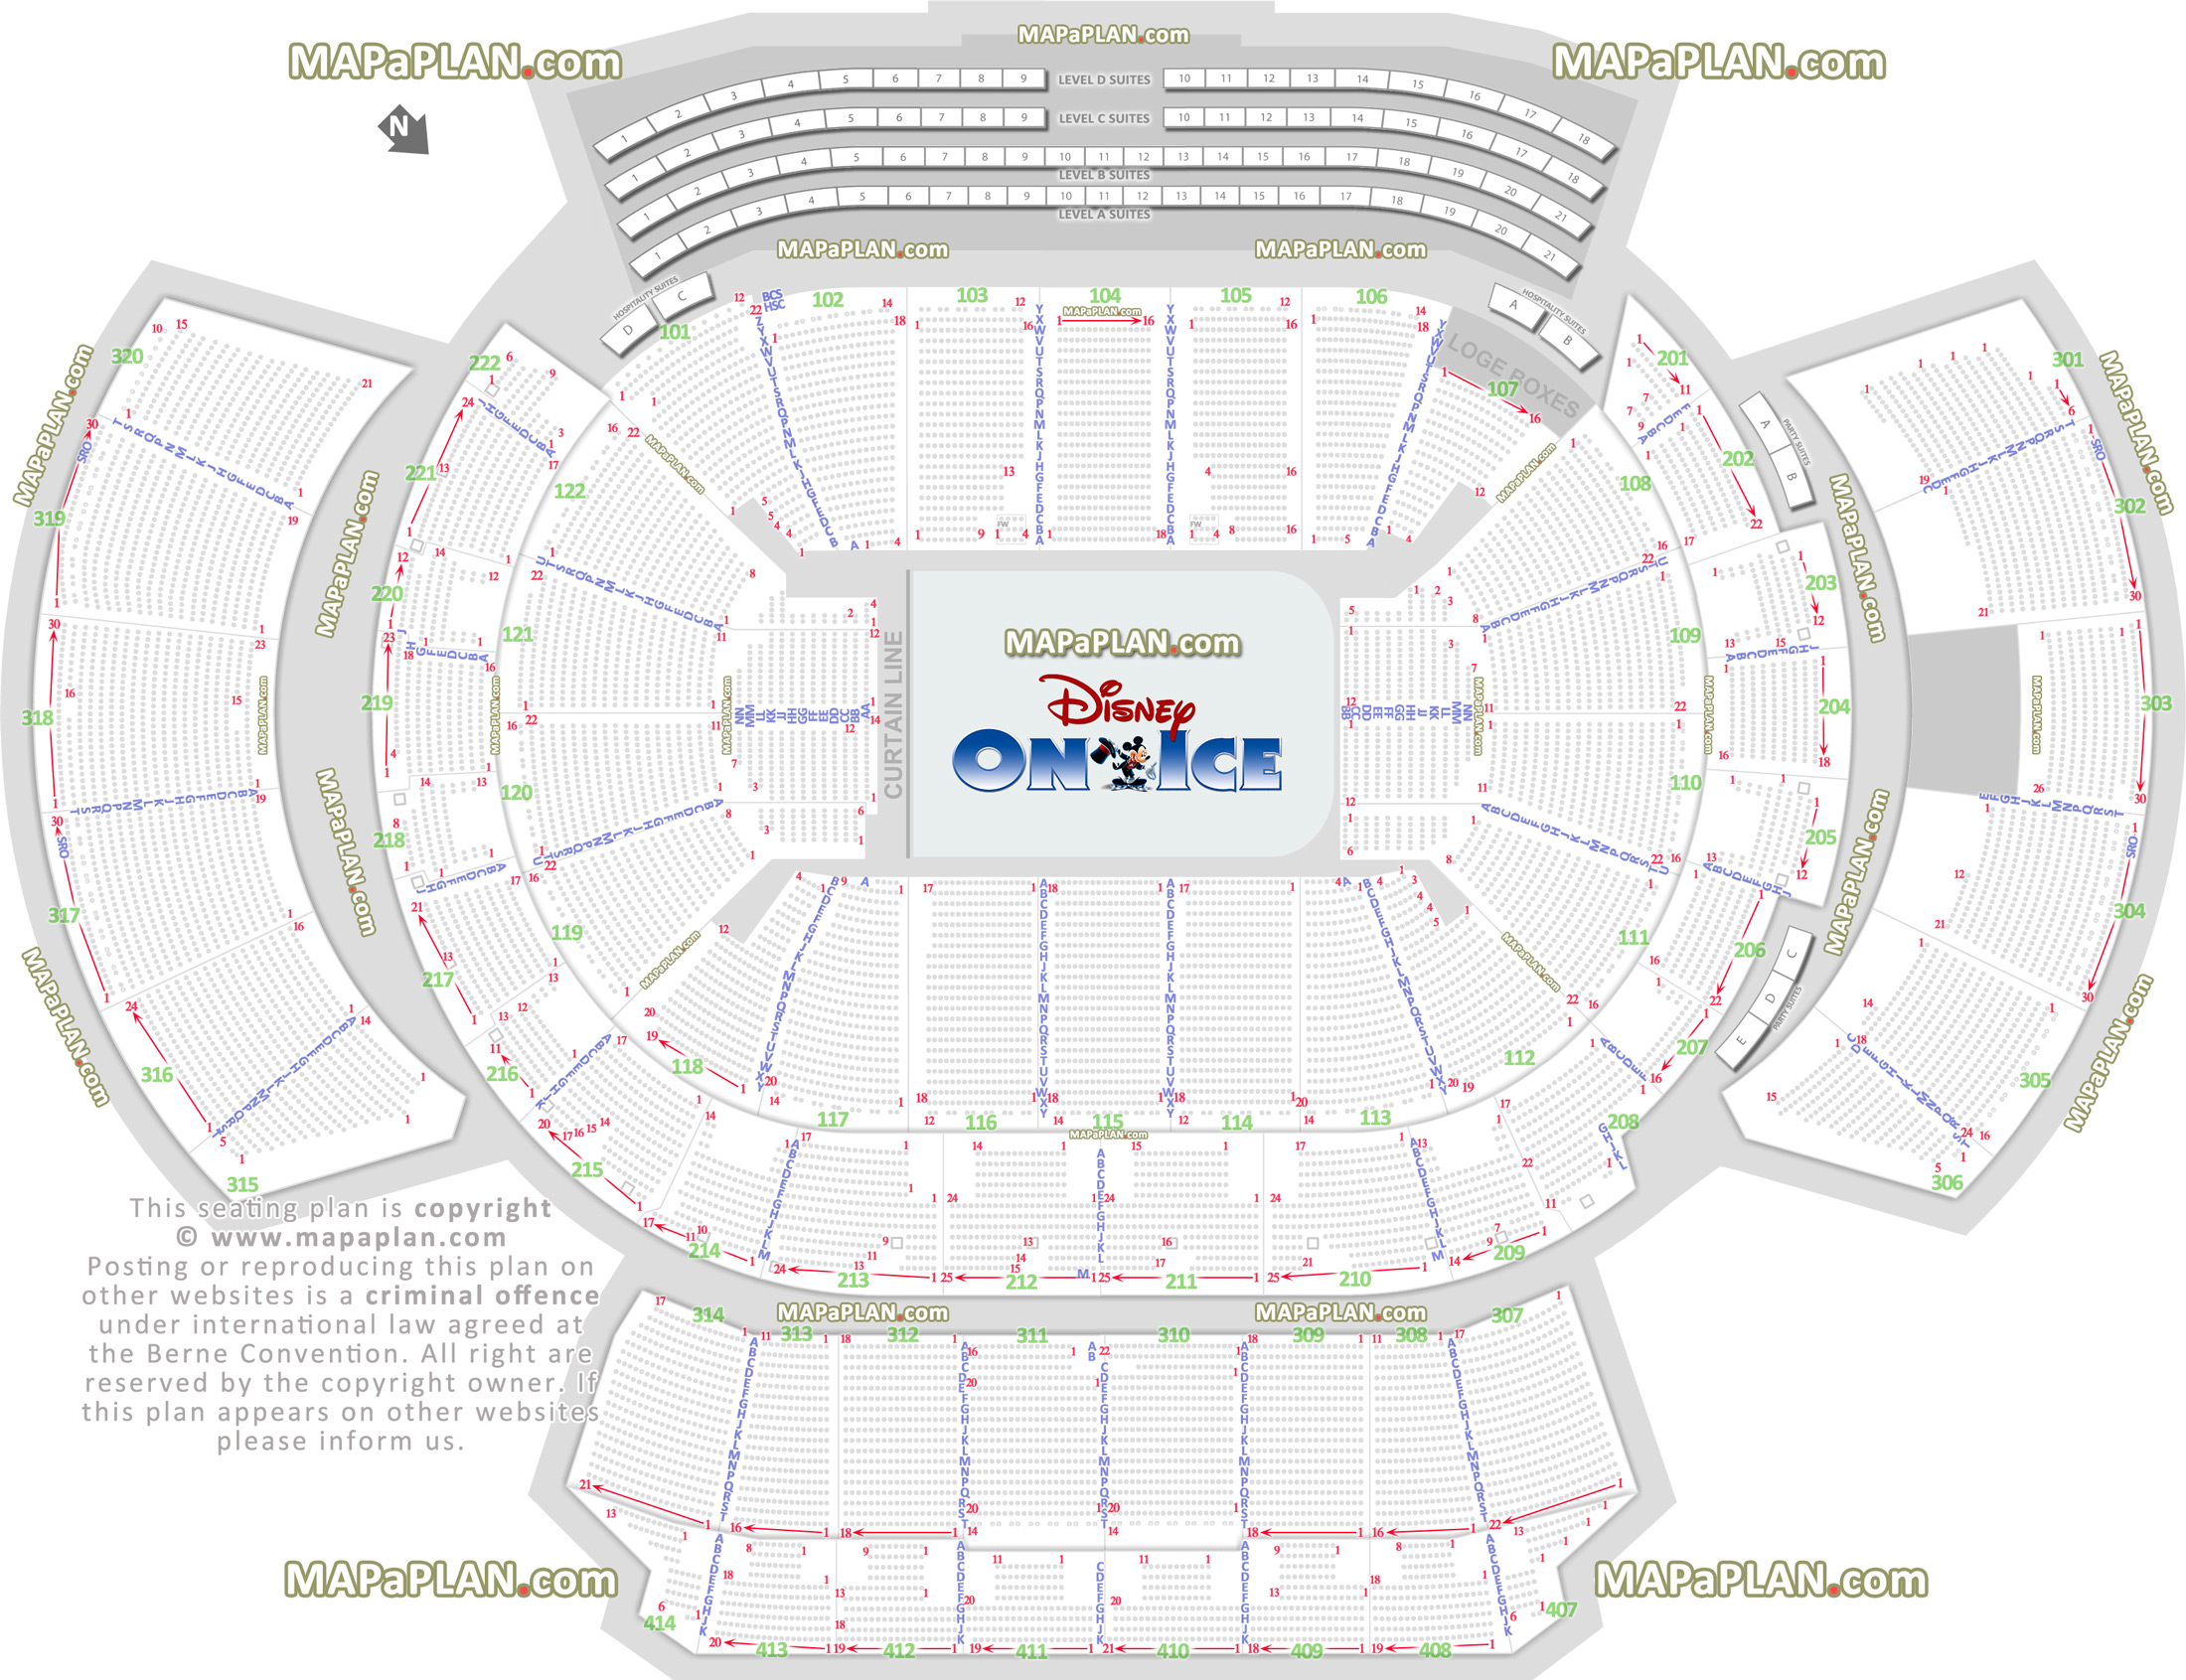 disney ice show mezzanine terrace seating arrangement review diagram best seat finder chart precise aisle numbering location data Atlanta State Farm Arena seating chart